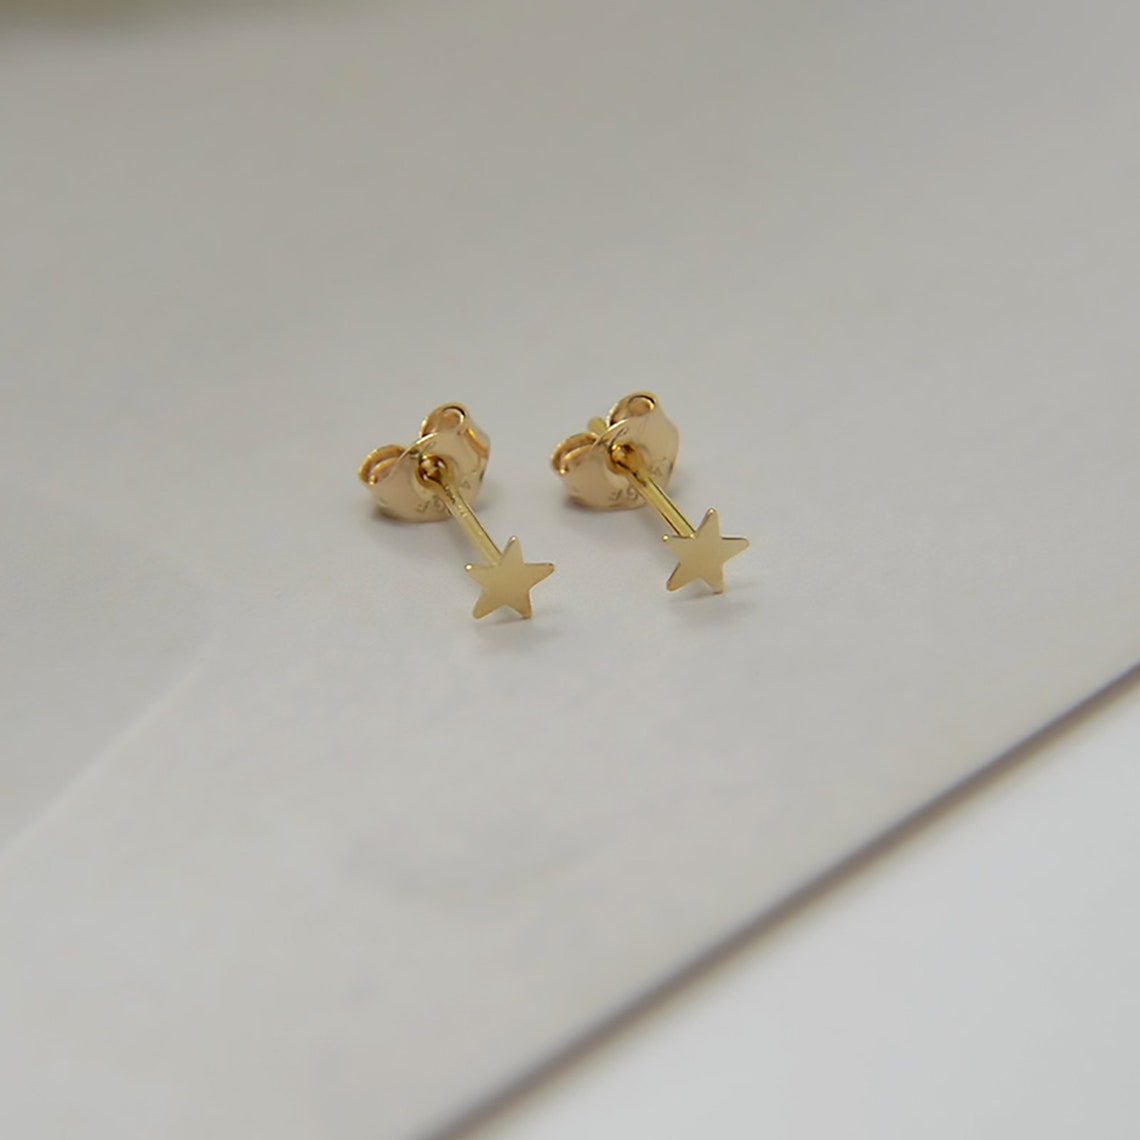 Dainty Tiny Star Stud Earrings Simple Small Studs 14k Gold | Etsy